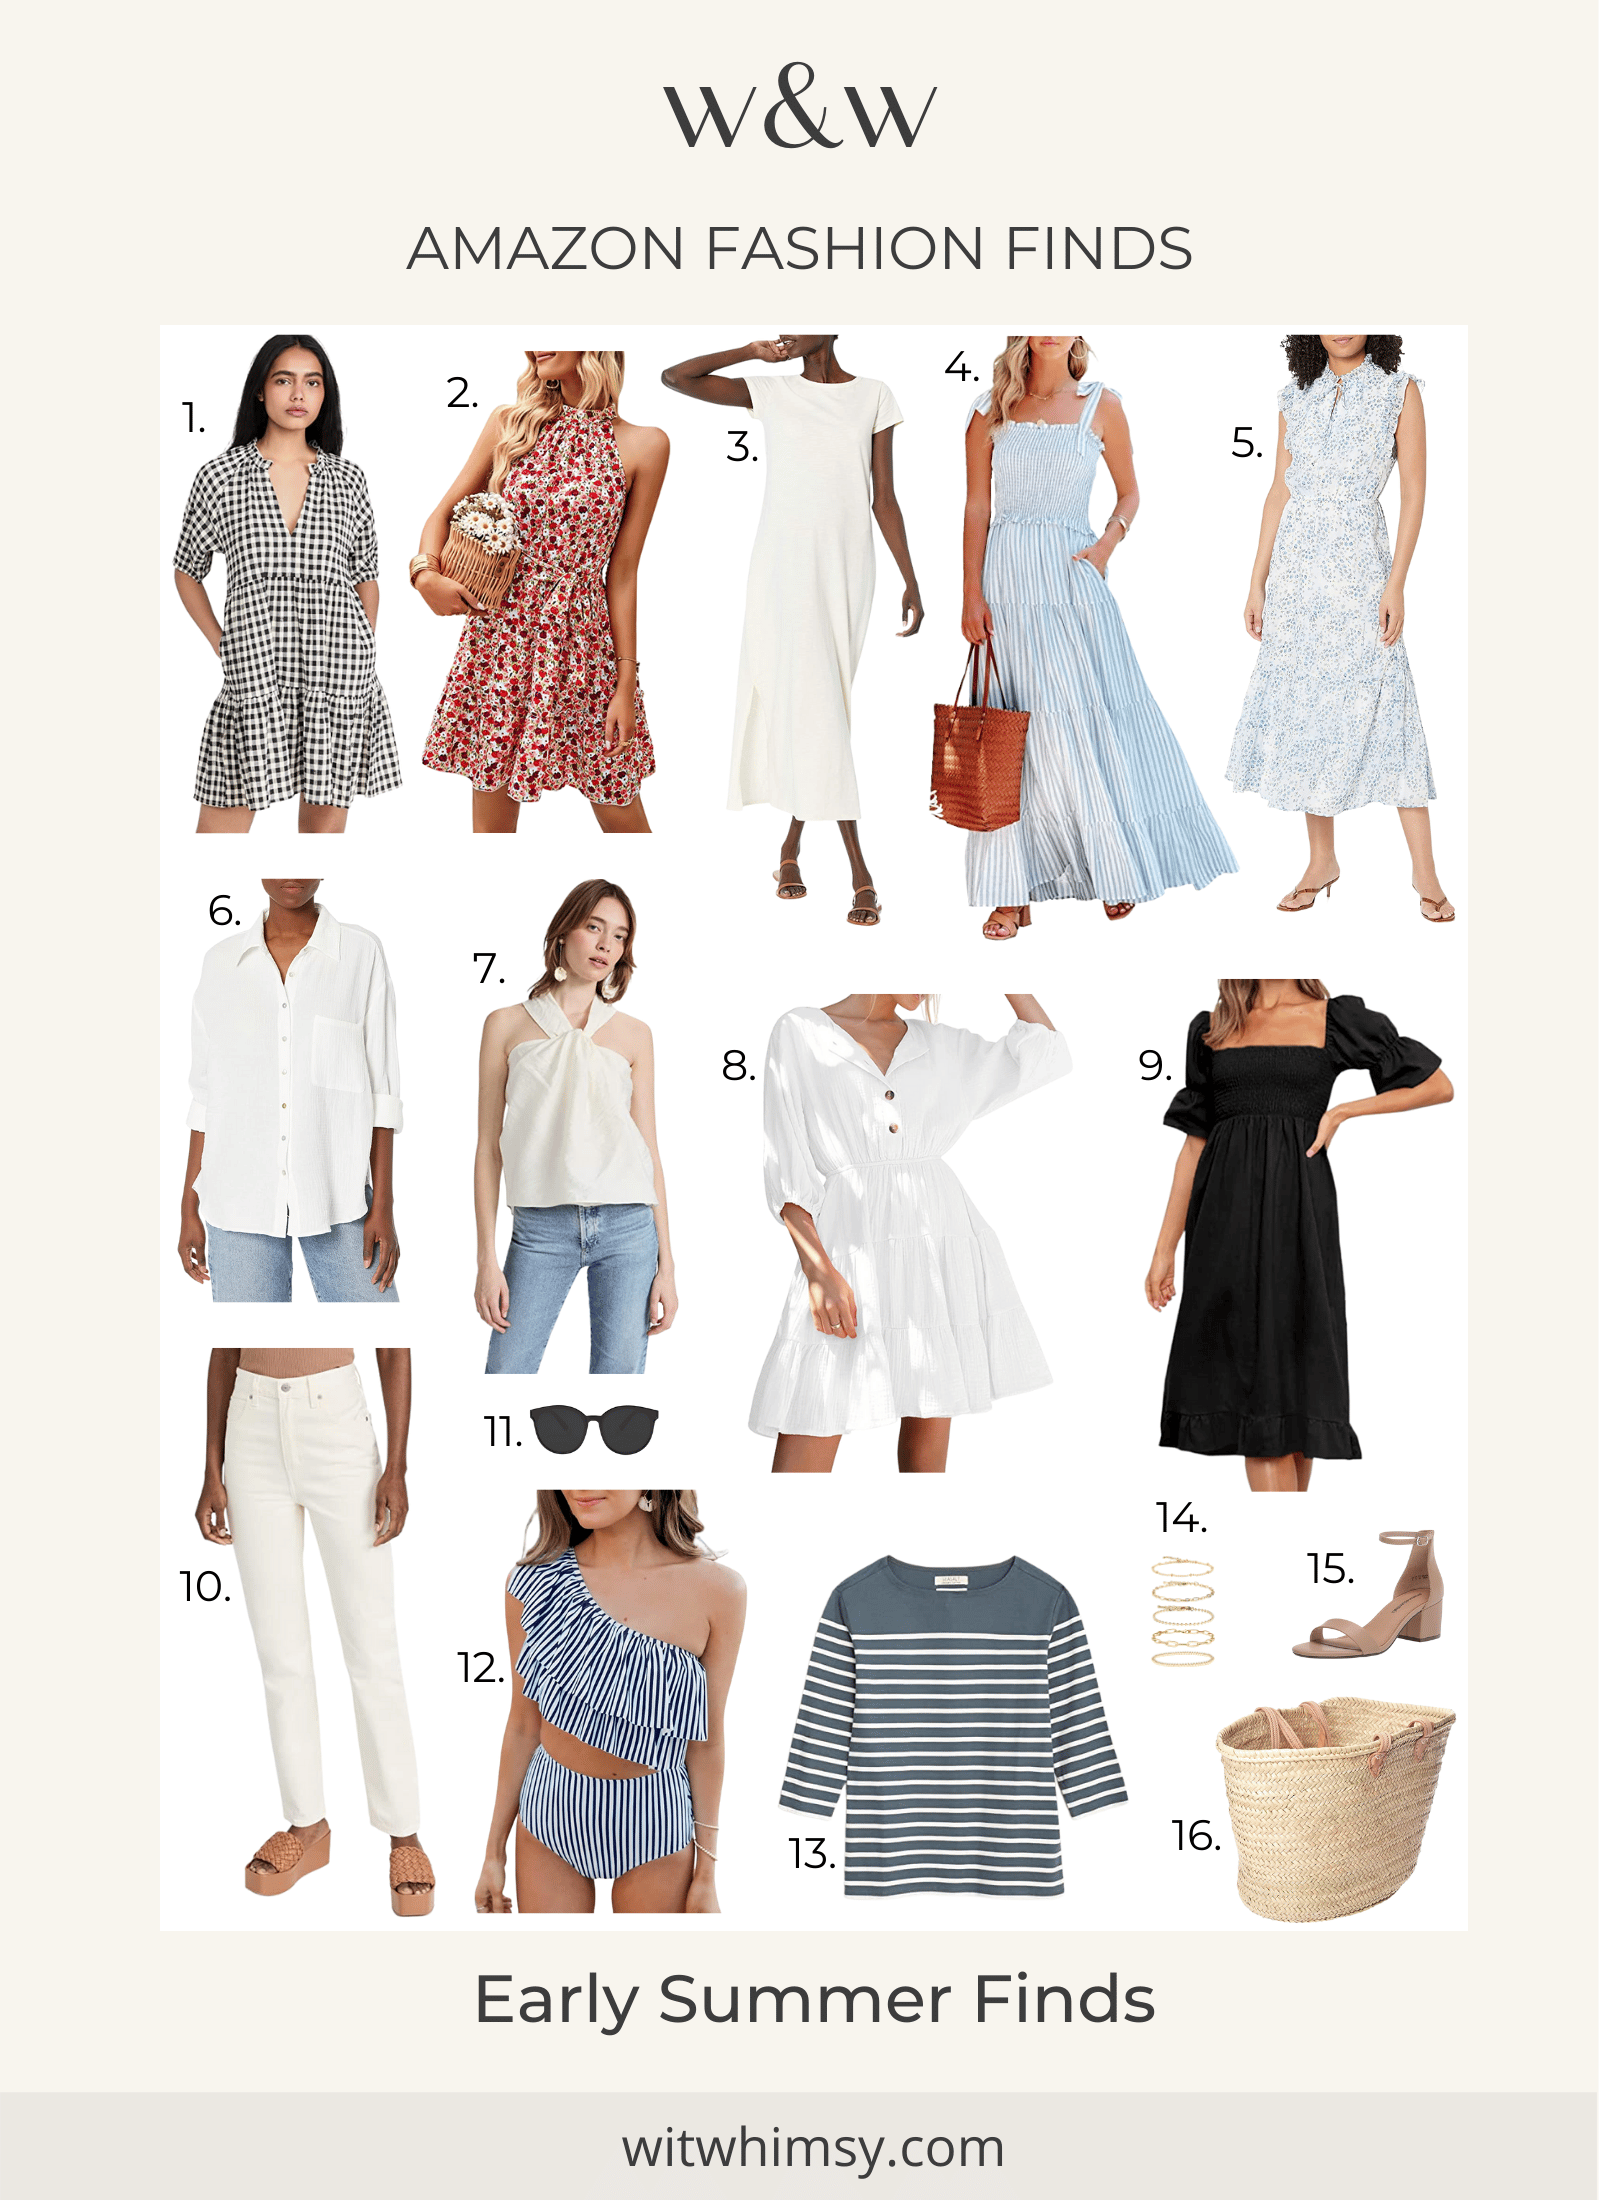 https://witwhimsy.com/wp-content/uploads/2022/05/Blog-Round-Up_Fashion-Finds-Amazon-Fashion_Early-Summer-Finds.png